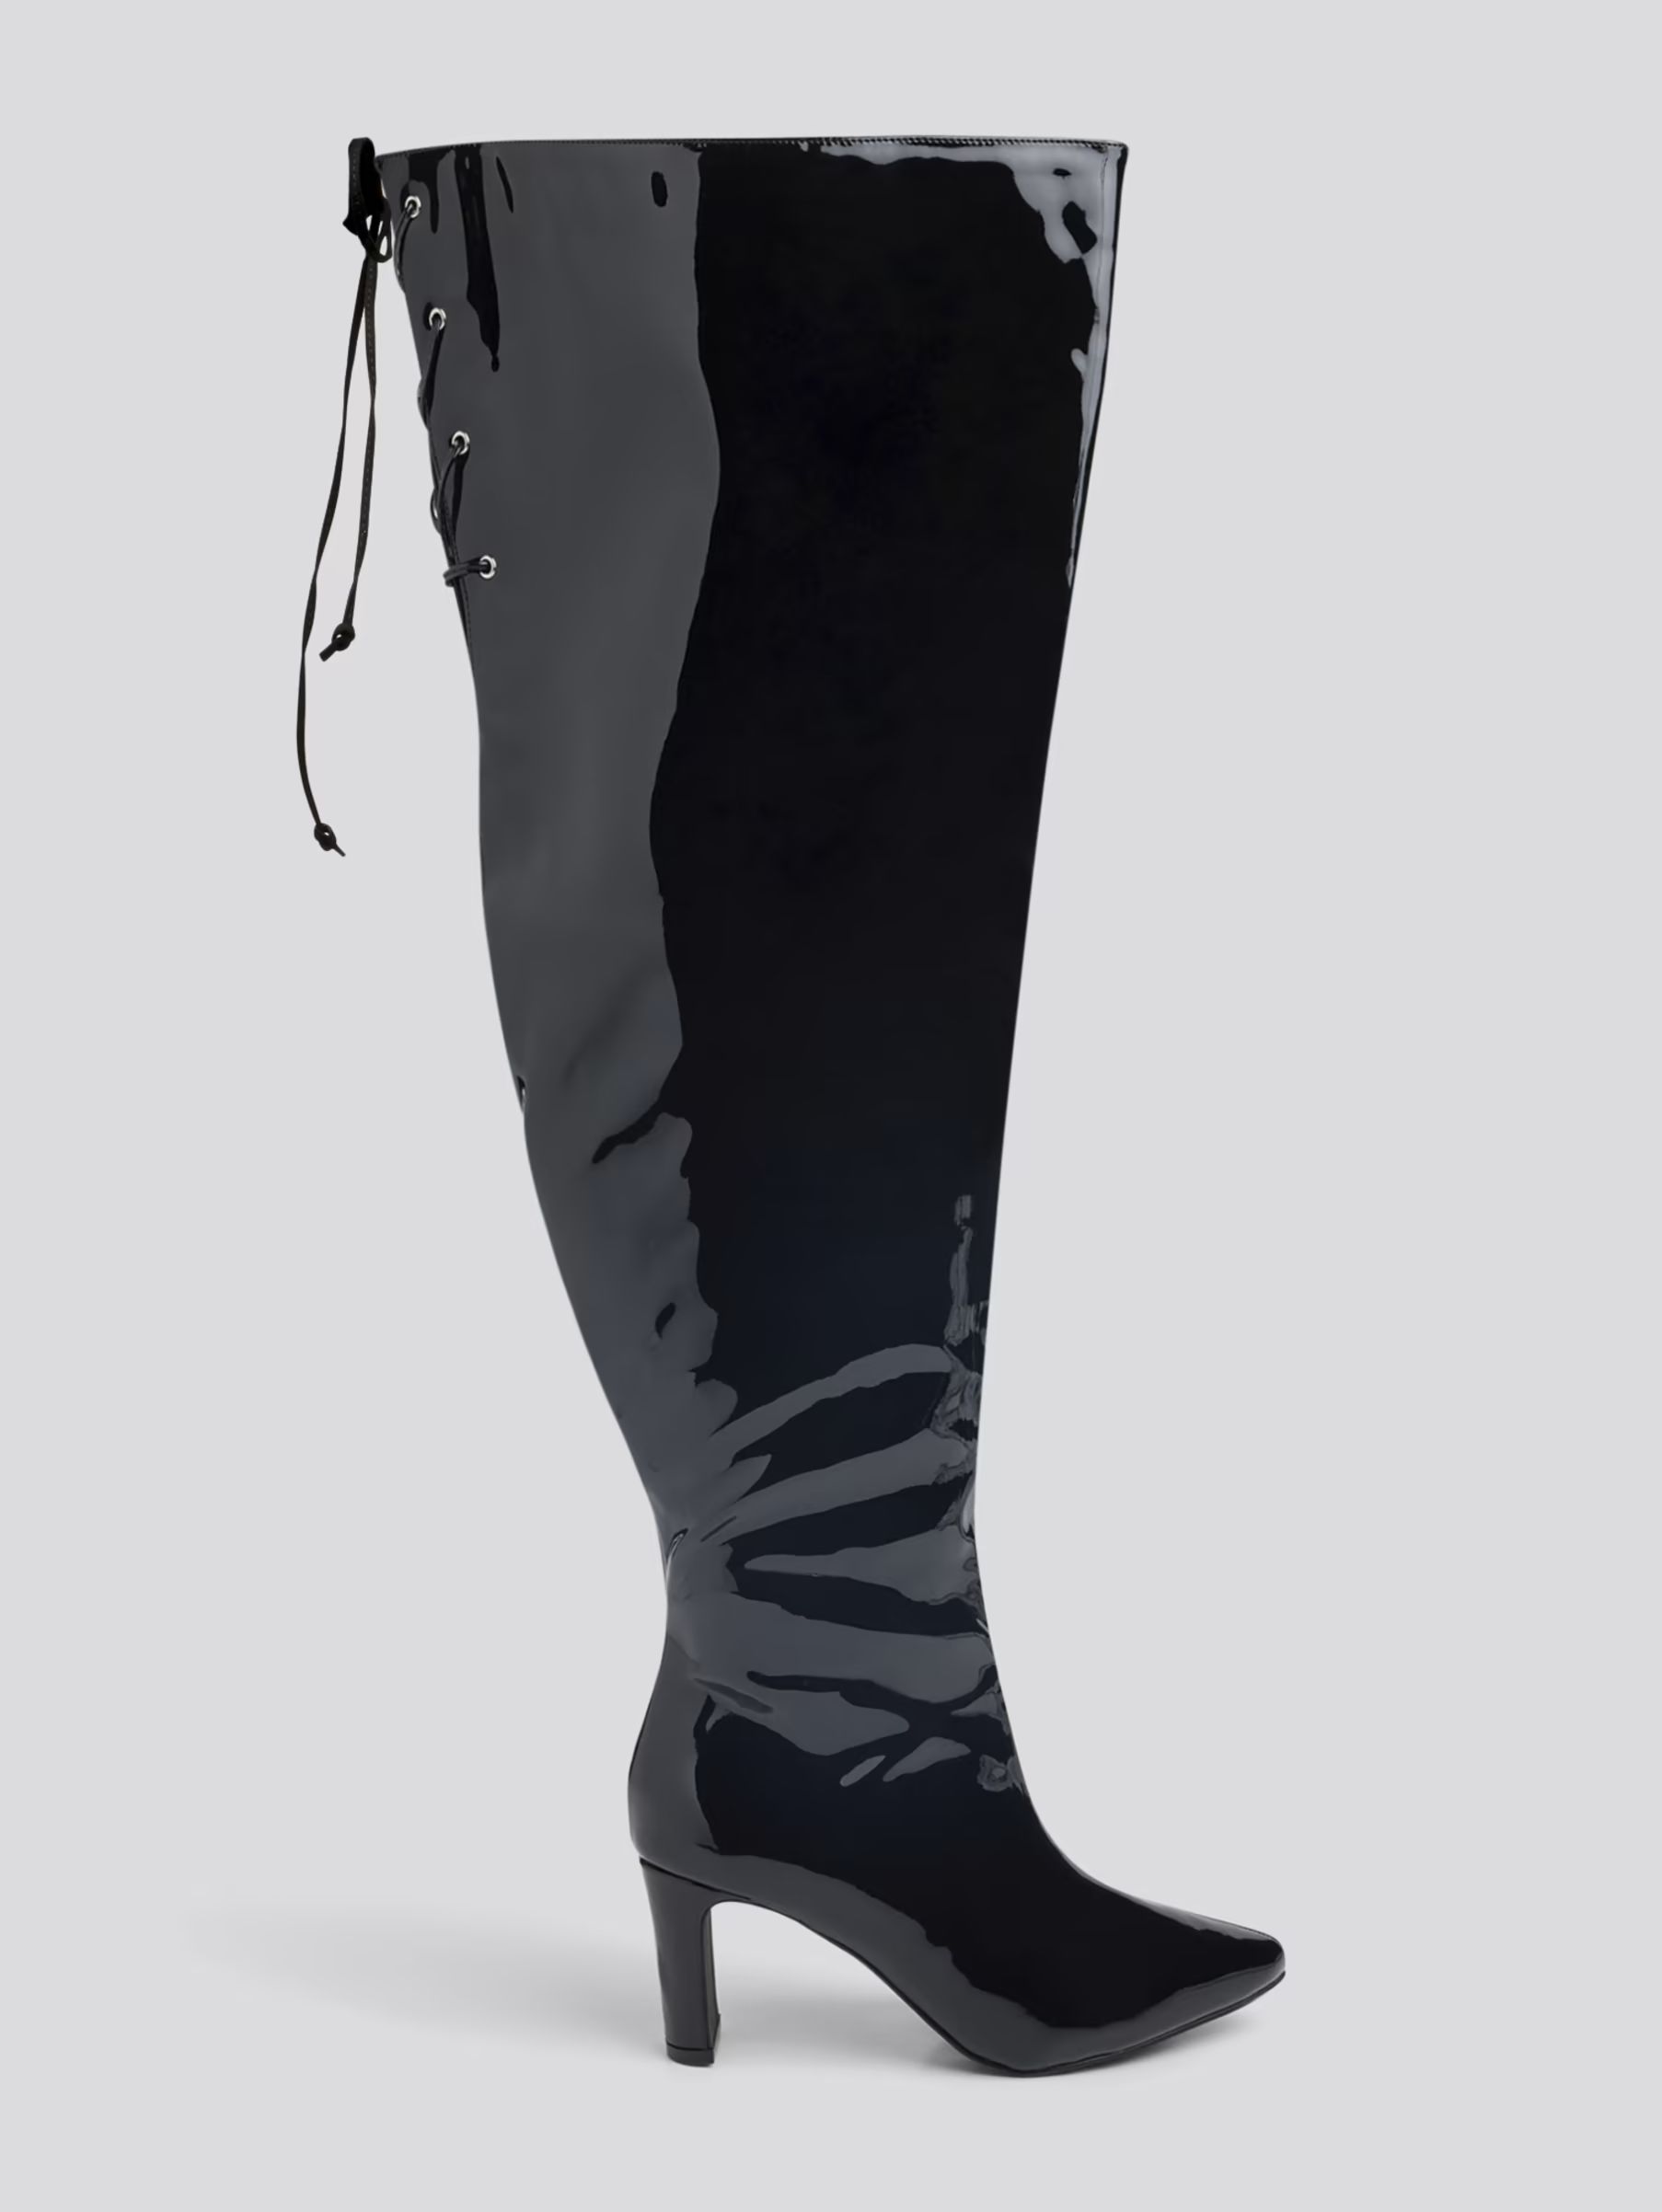 Plus Size Alfinil Patent Leather Thigh-High Boots - Nadia x FTF | Fashion to Figure | Fashion To Figure